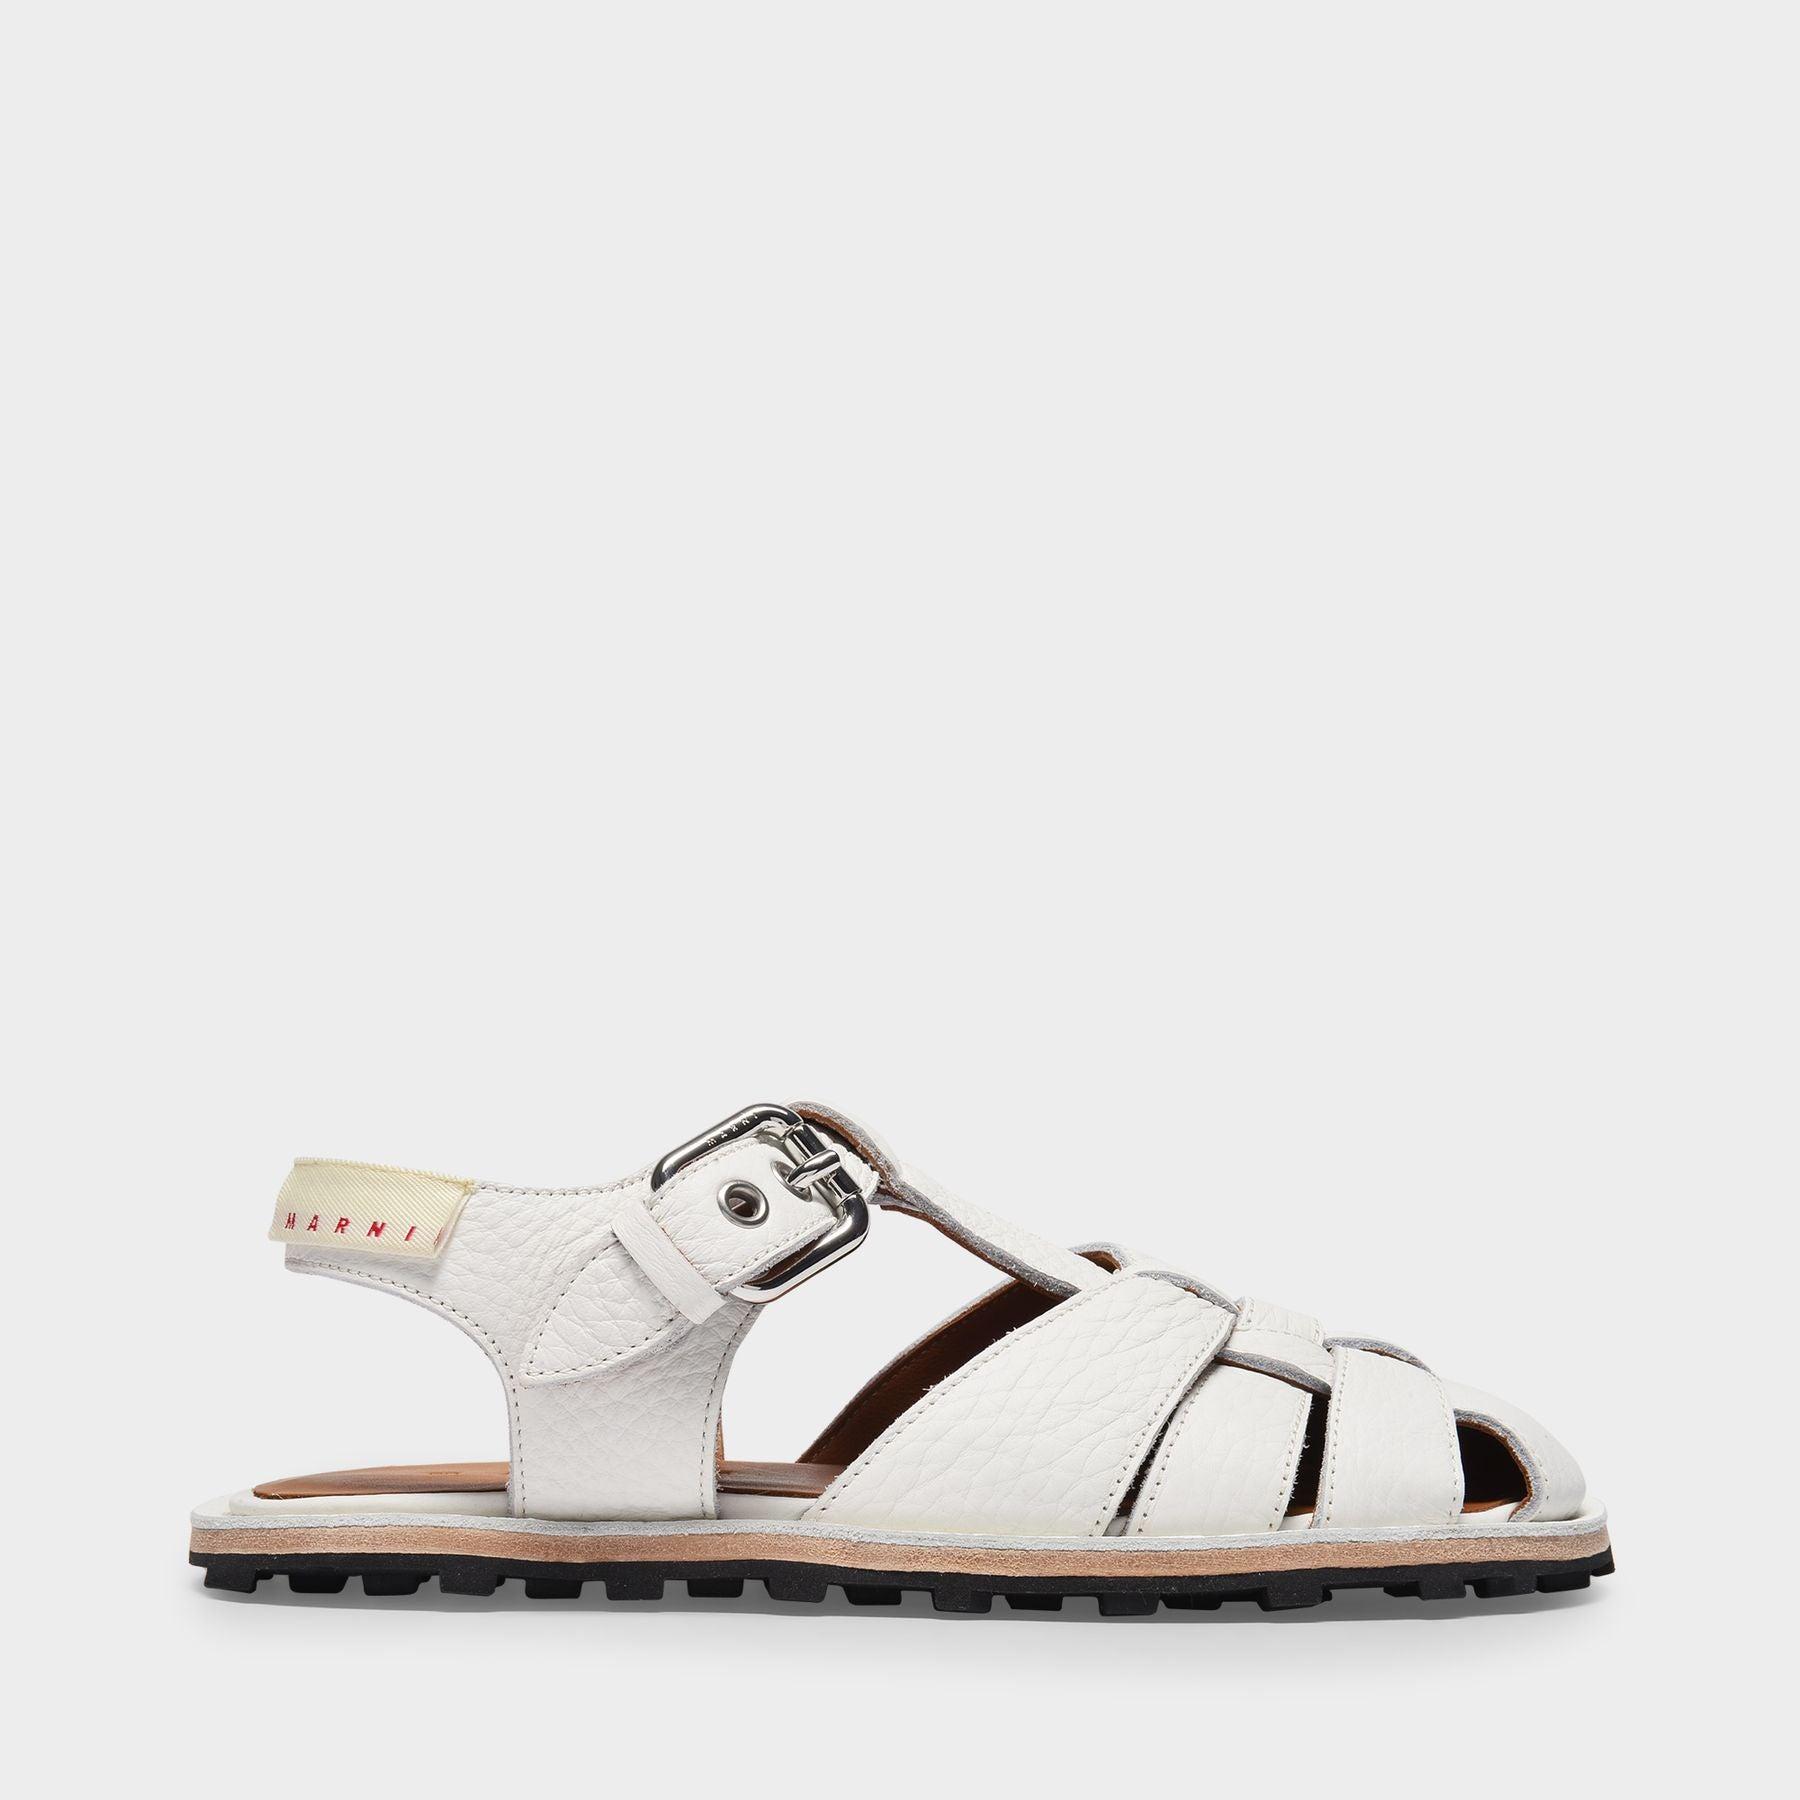 Marni Leather Fisherman Pebble Sandals in White | Lyst